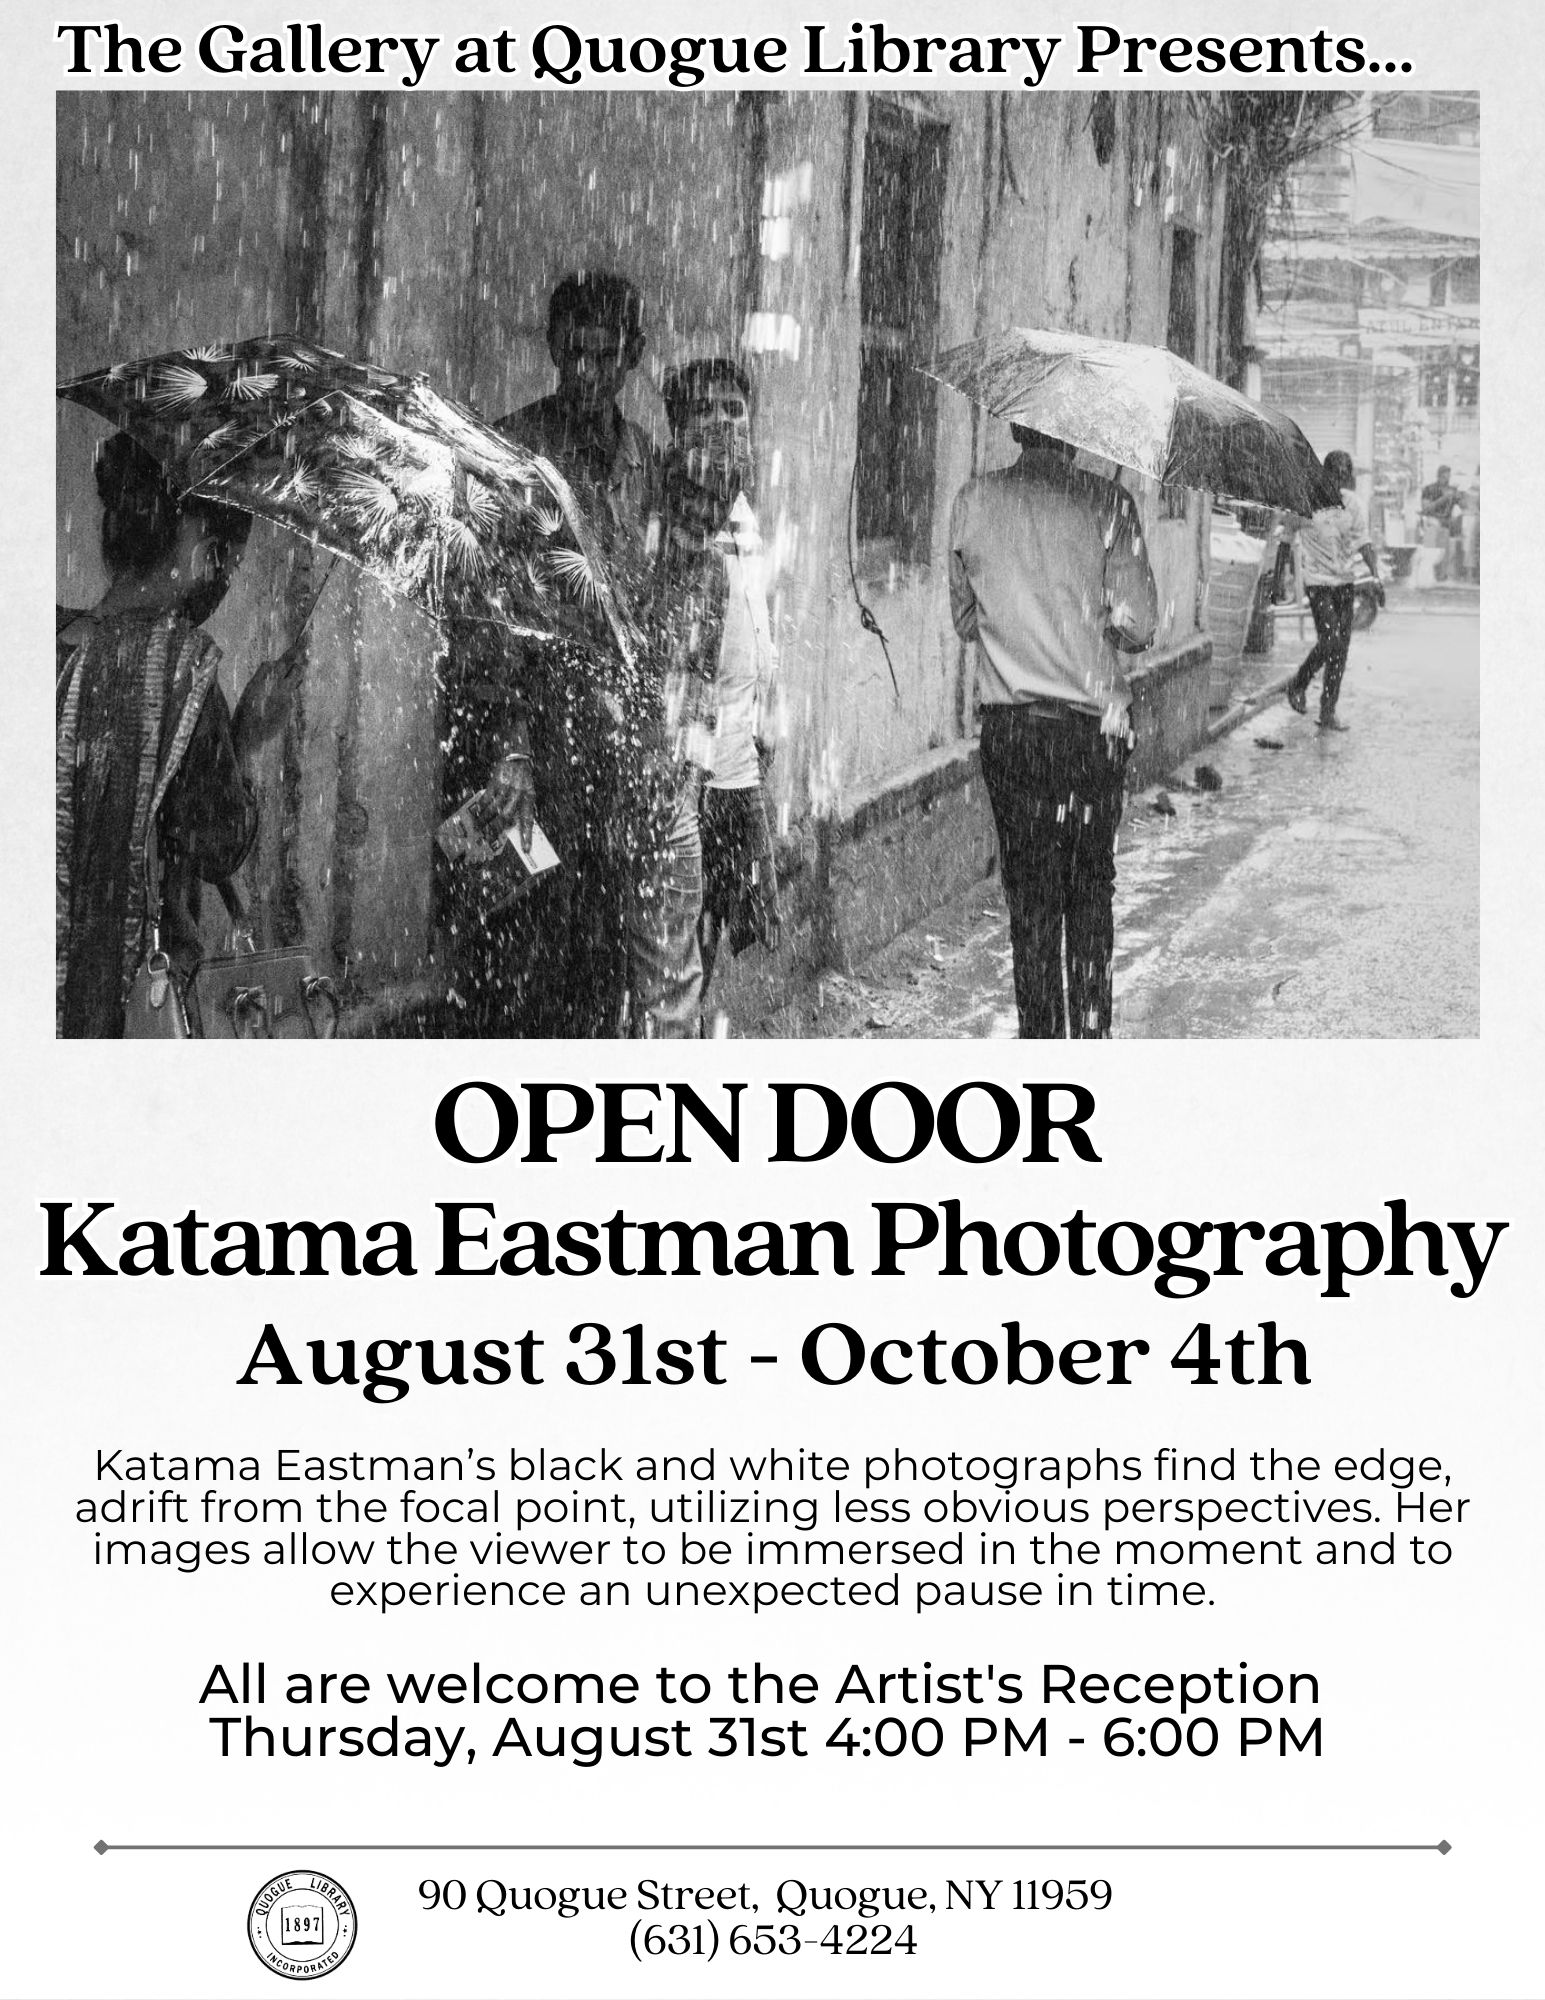 The Gallery at the Quogue Library Presents: Katama Eastman Photography Artist Reception